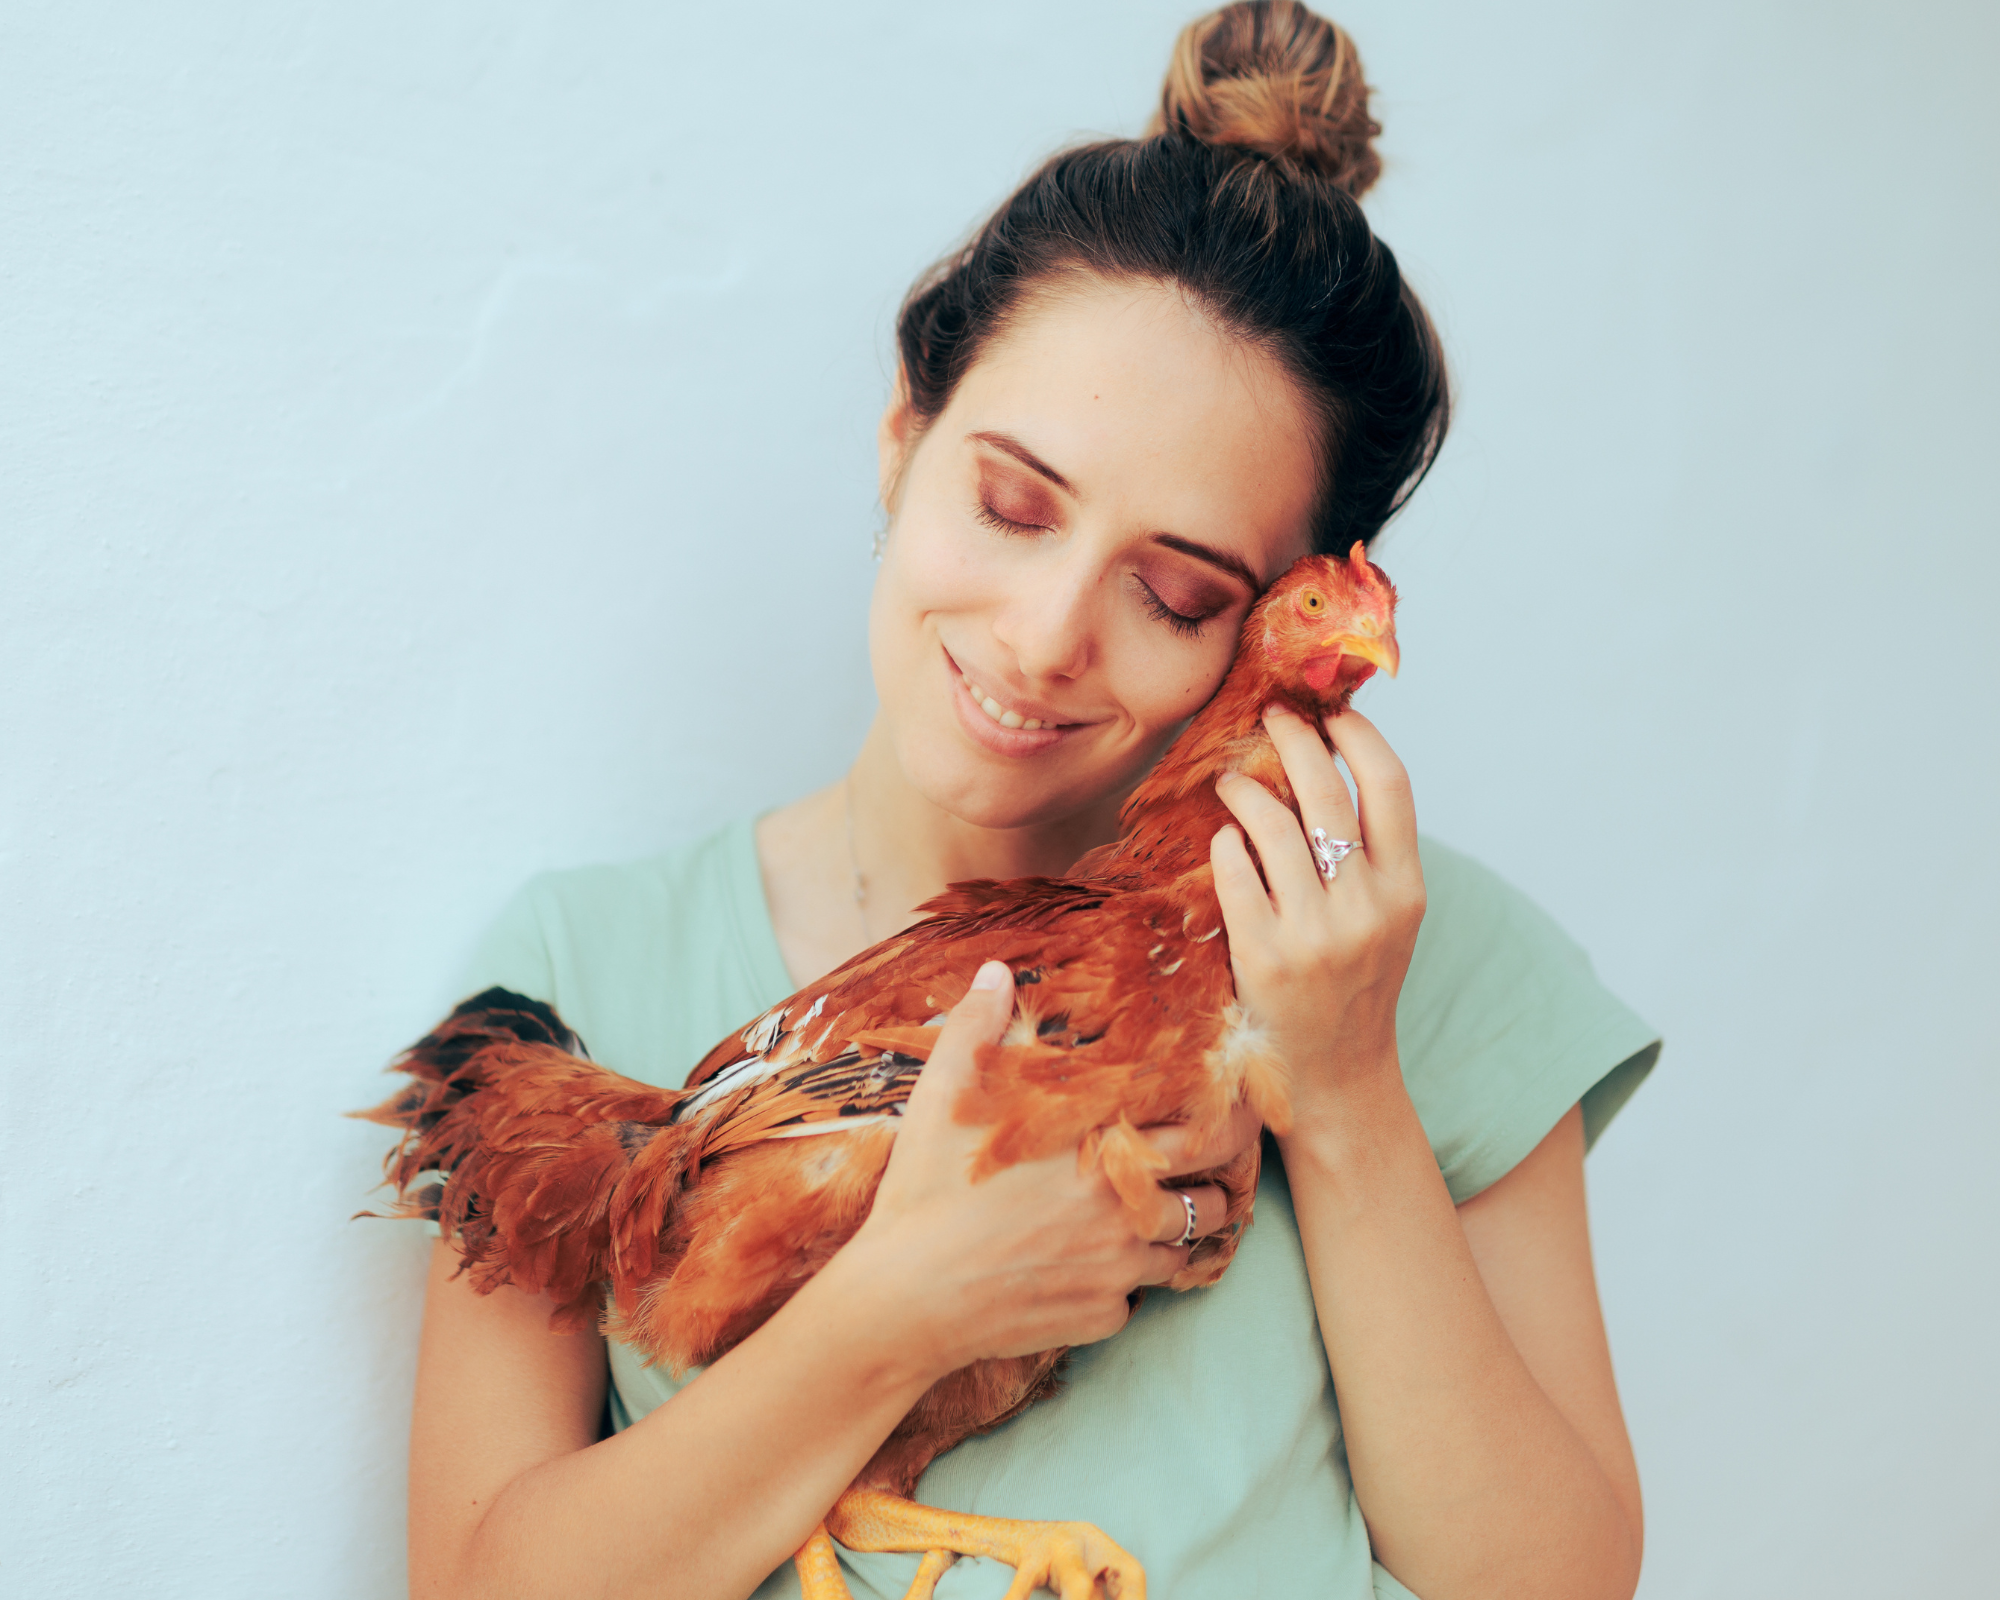 woman bonding with pet chicken